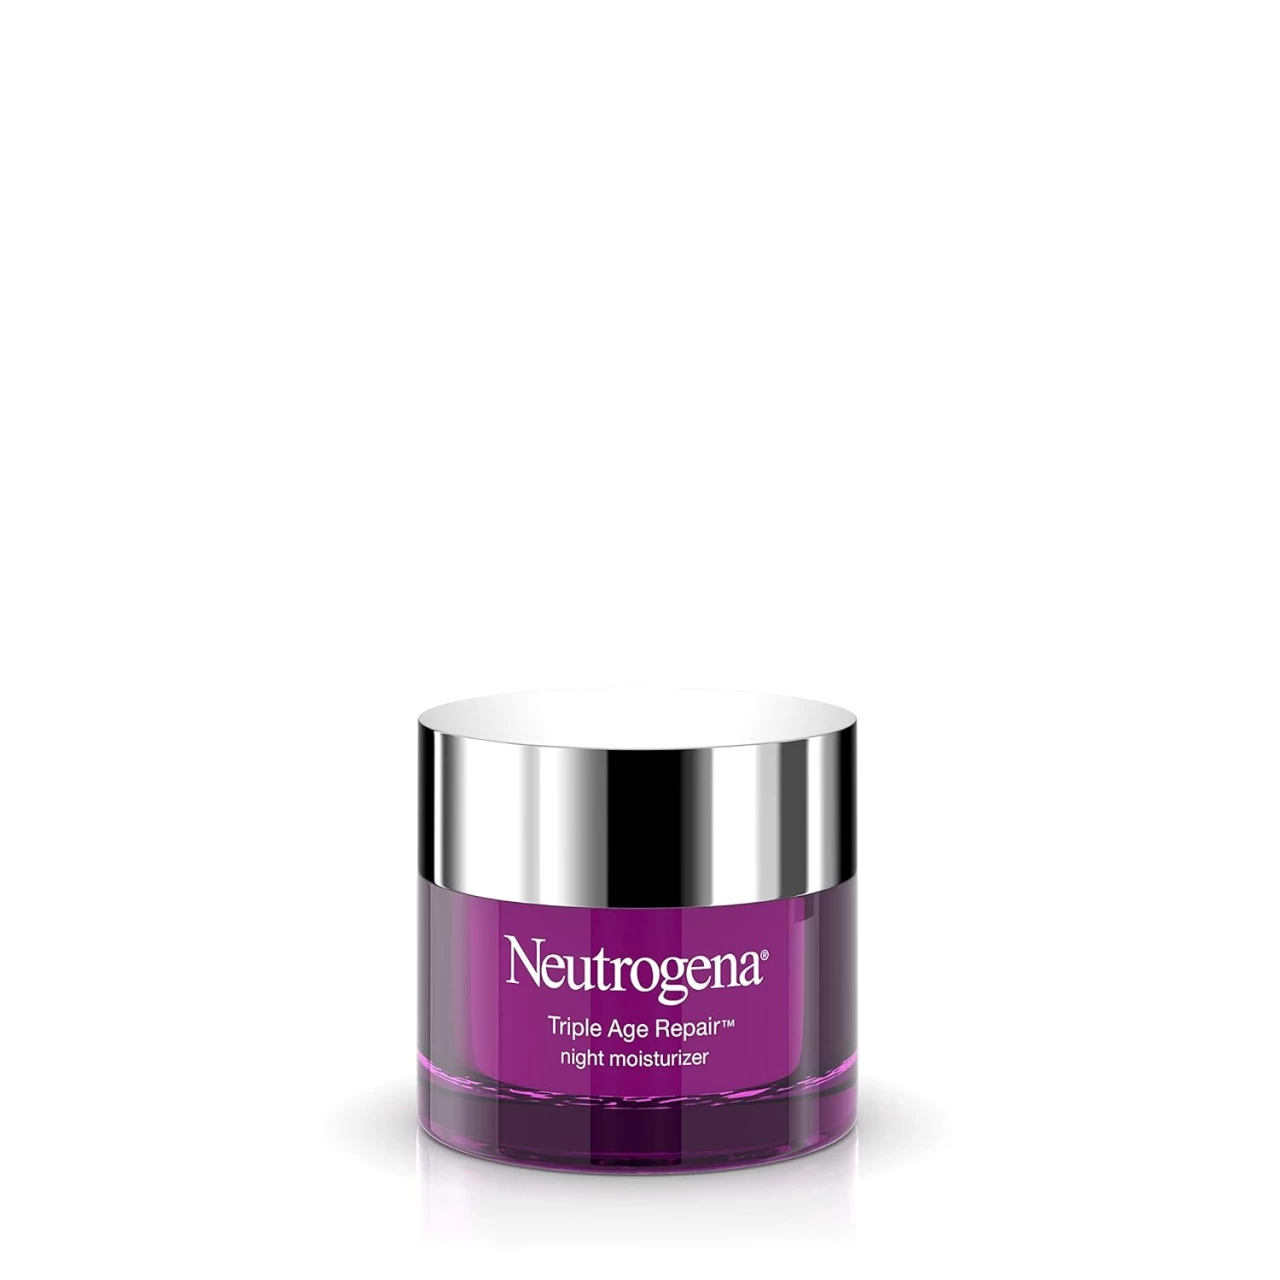 Neutrogena Triple Age Repair Anti-Aging Night Cream with Vitamin C; Fights Wrinkles &amp; Evens Tone, Firming Anti-Wrinkle Face &amp; Neck Cream; Glycerin &amp; Shea Butter, 1.7 oz